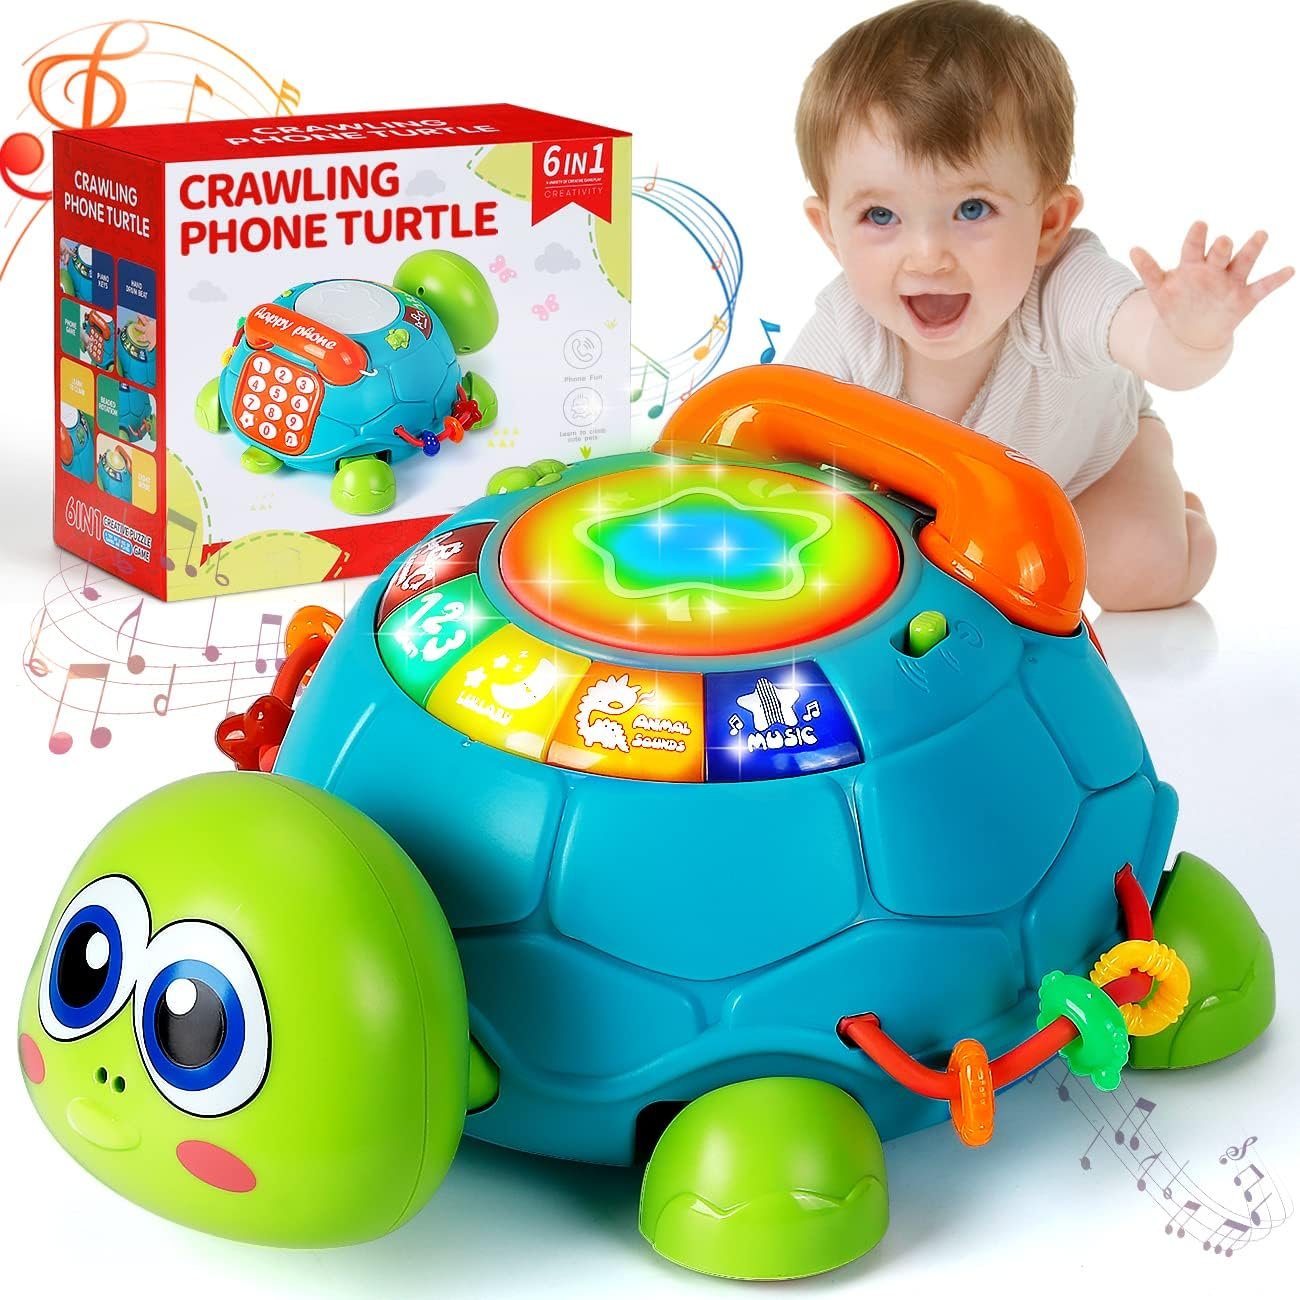 SYHLN Toys for 1 Year Old Boys Girls Gifts, Tummy Time Crawling Turtle Baby Toys 6 to 12 Months, Baby Einstein Musical Light Up Toys for Infants 12-18 Months, 1st Birthday Gifts for Girls Boys